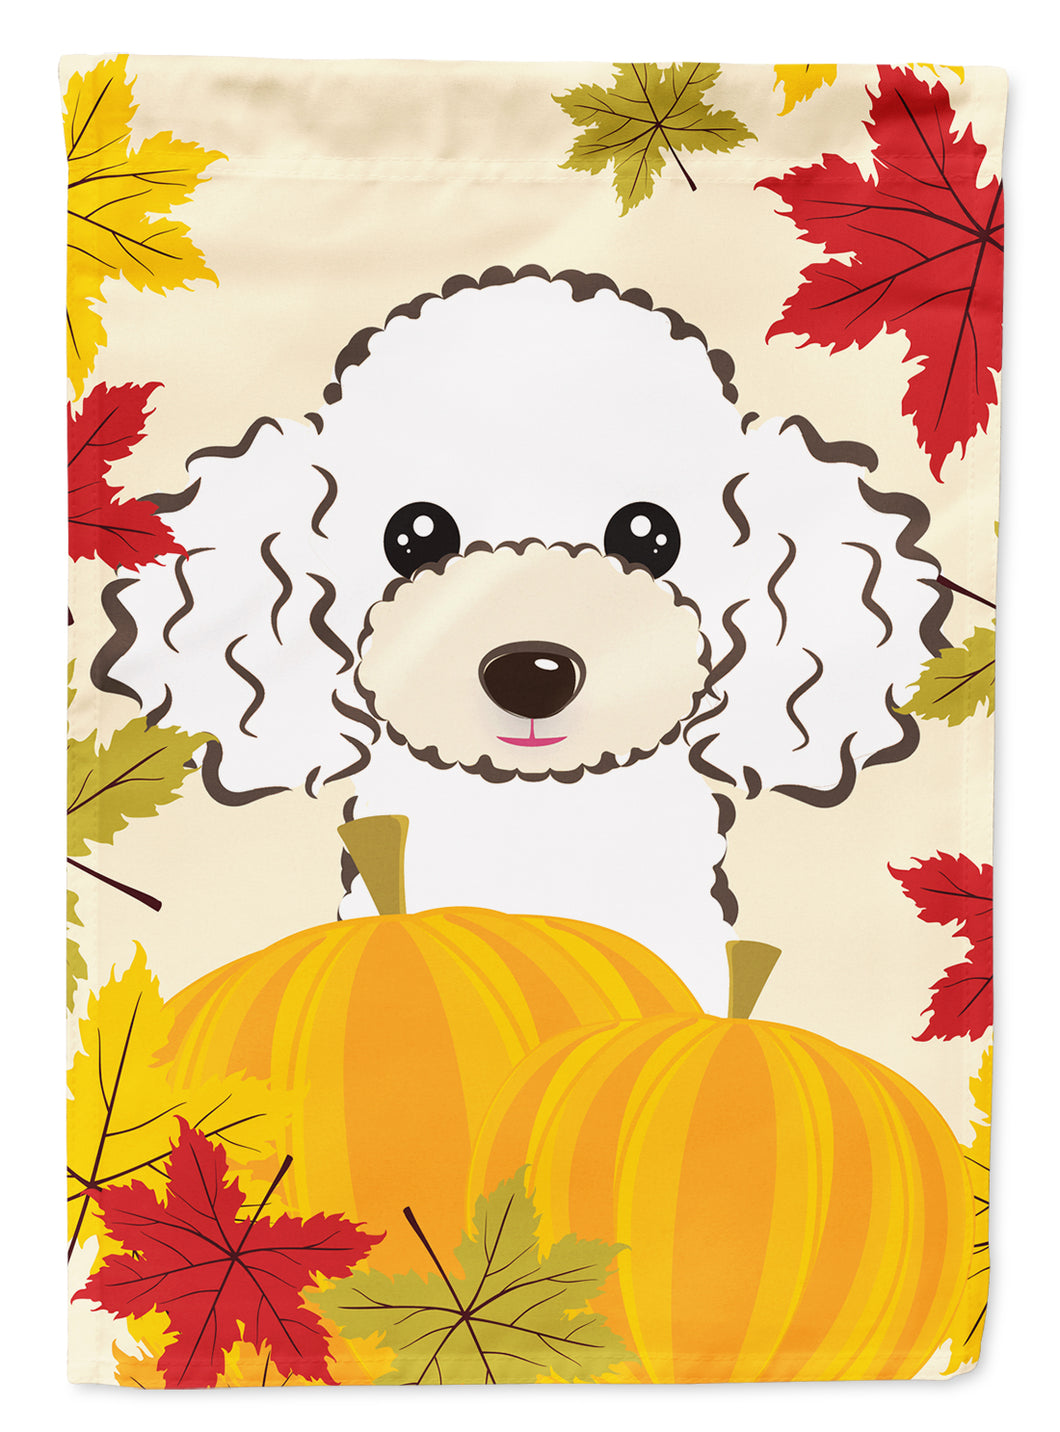 White Poodle Thanksgiving Garden Flag 2-Sided 2-Ply